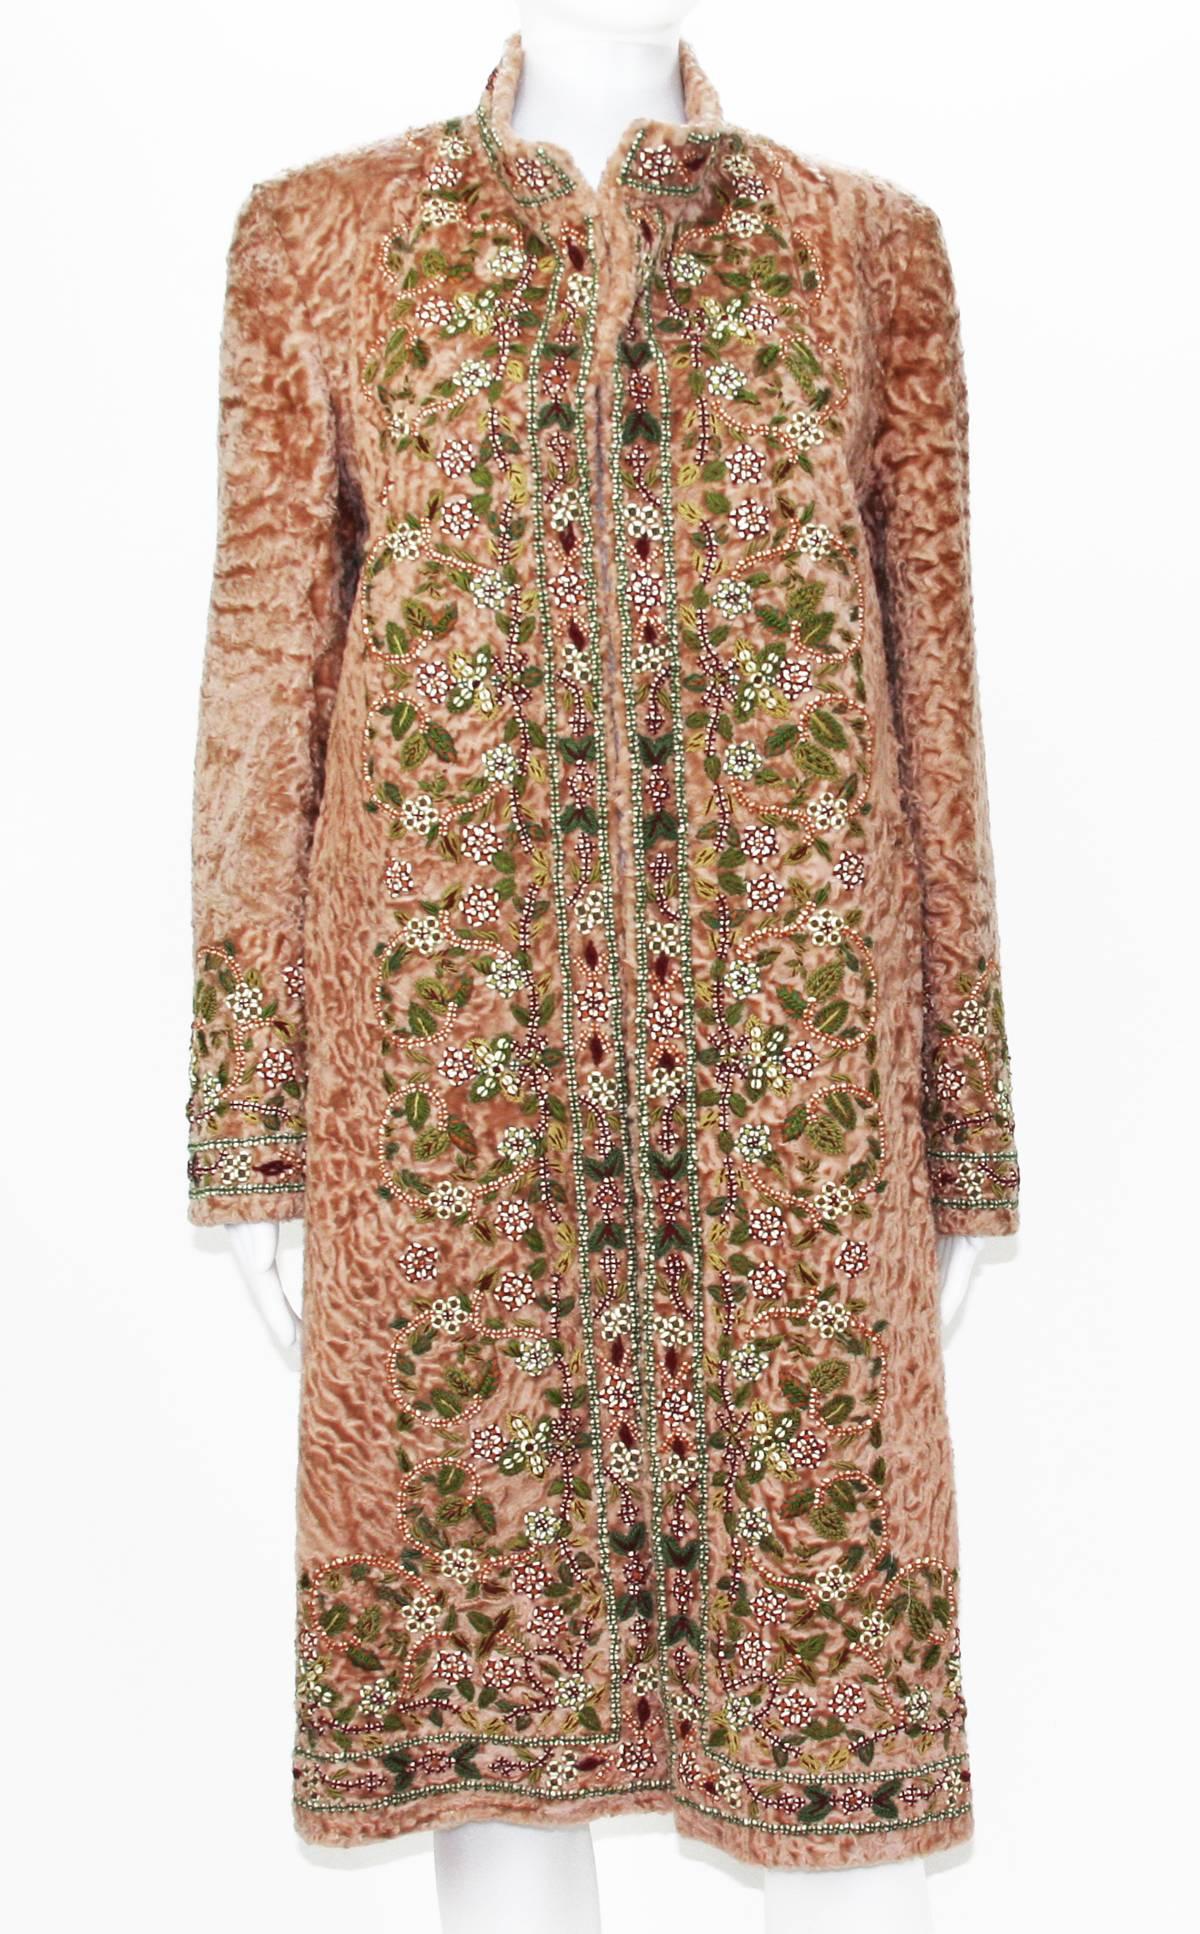 Rare OSCAR DE LA RENTA COUTURE Fur Embellished Coat
F/W 2002 Collection
100% Broadtail Swakara
Color - Peach
Beaded & Embroidered
Fully Lined
Two Side Pockets
Open Style, No Closure
Measurements: Length - 40 inches, Sleeve - 25 inches, Bust - 40